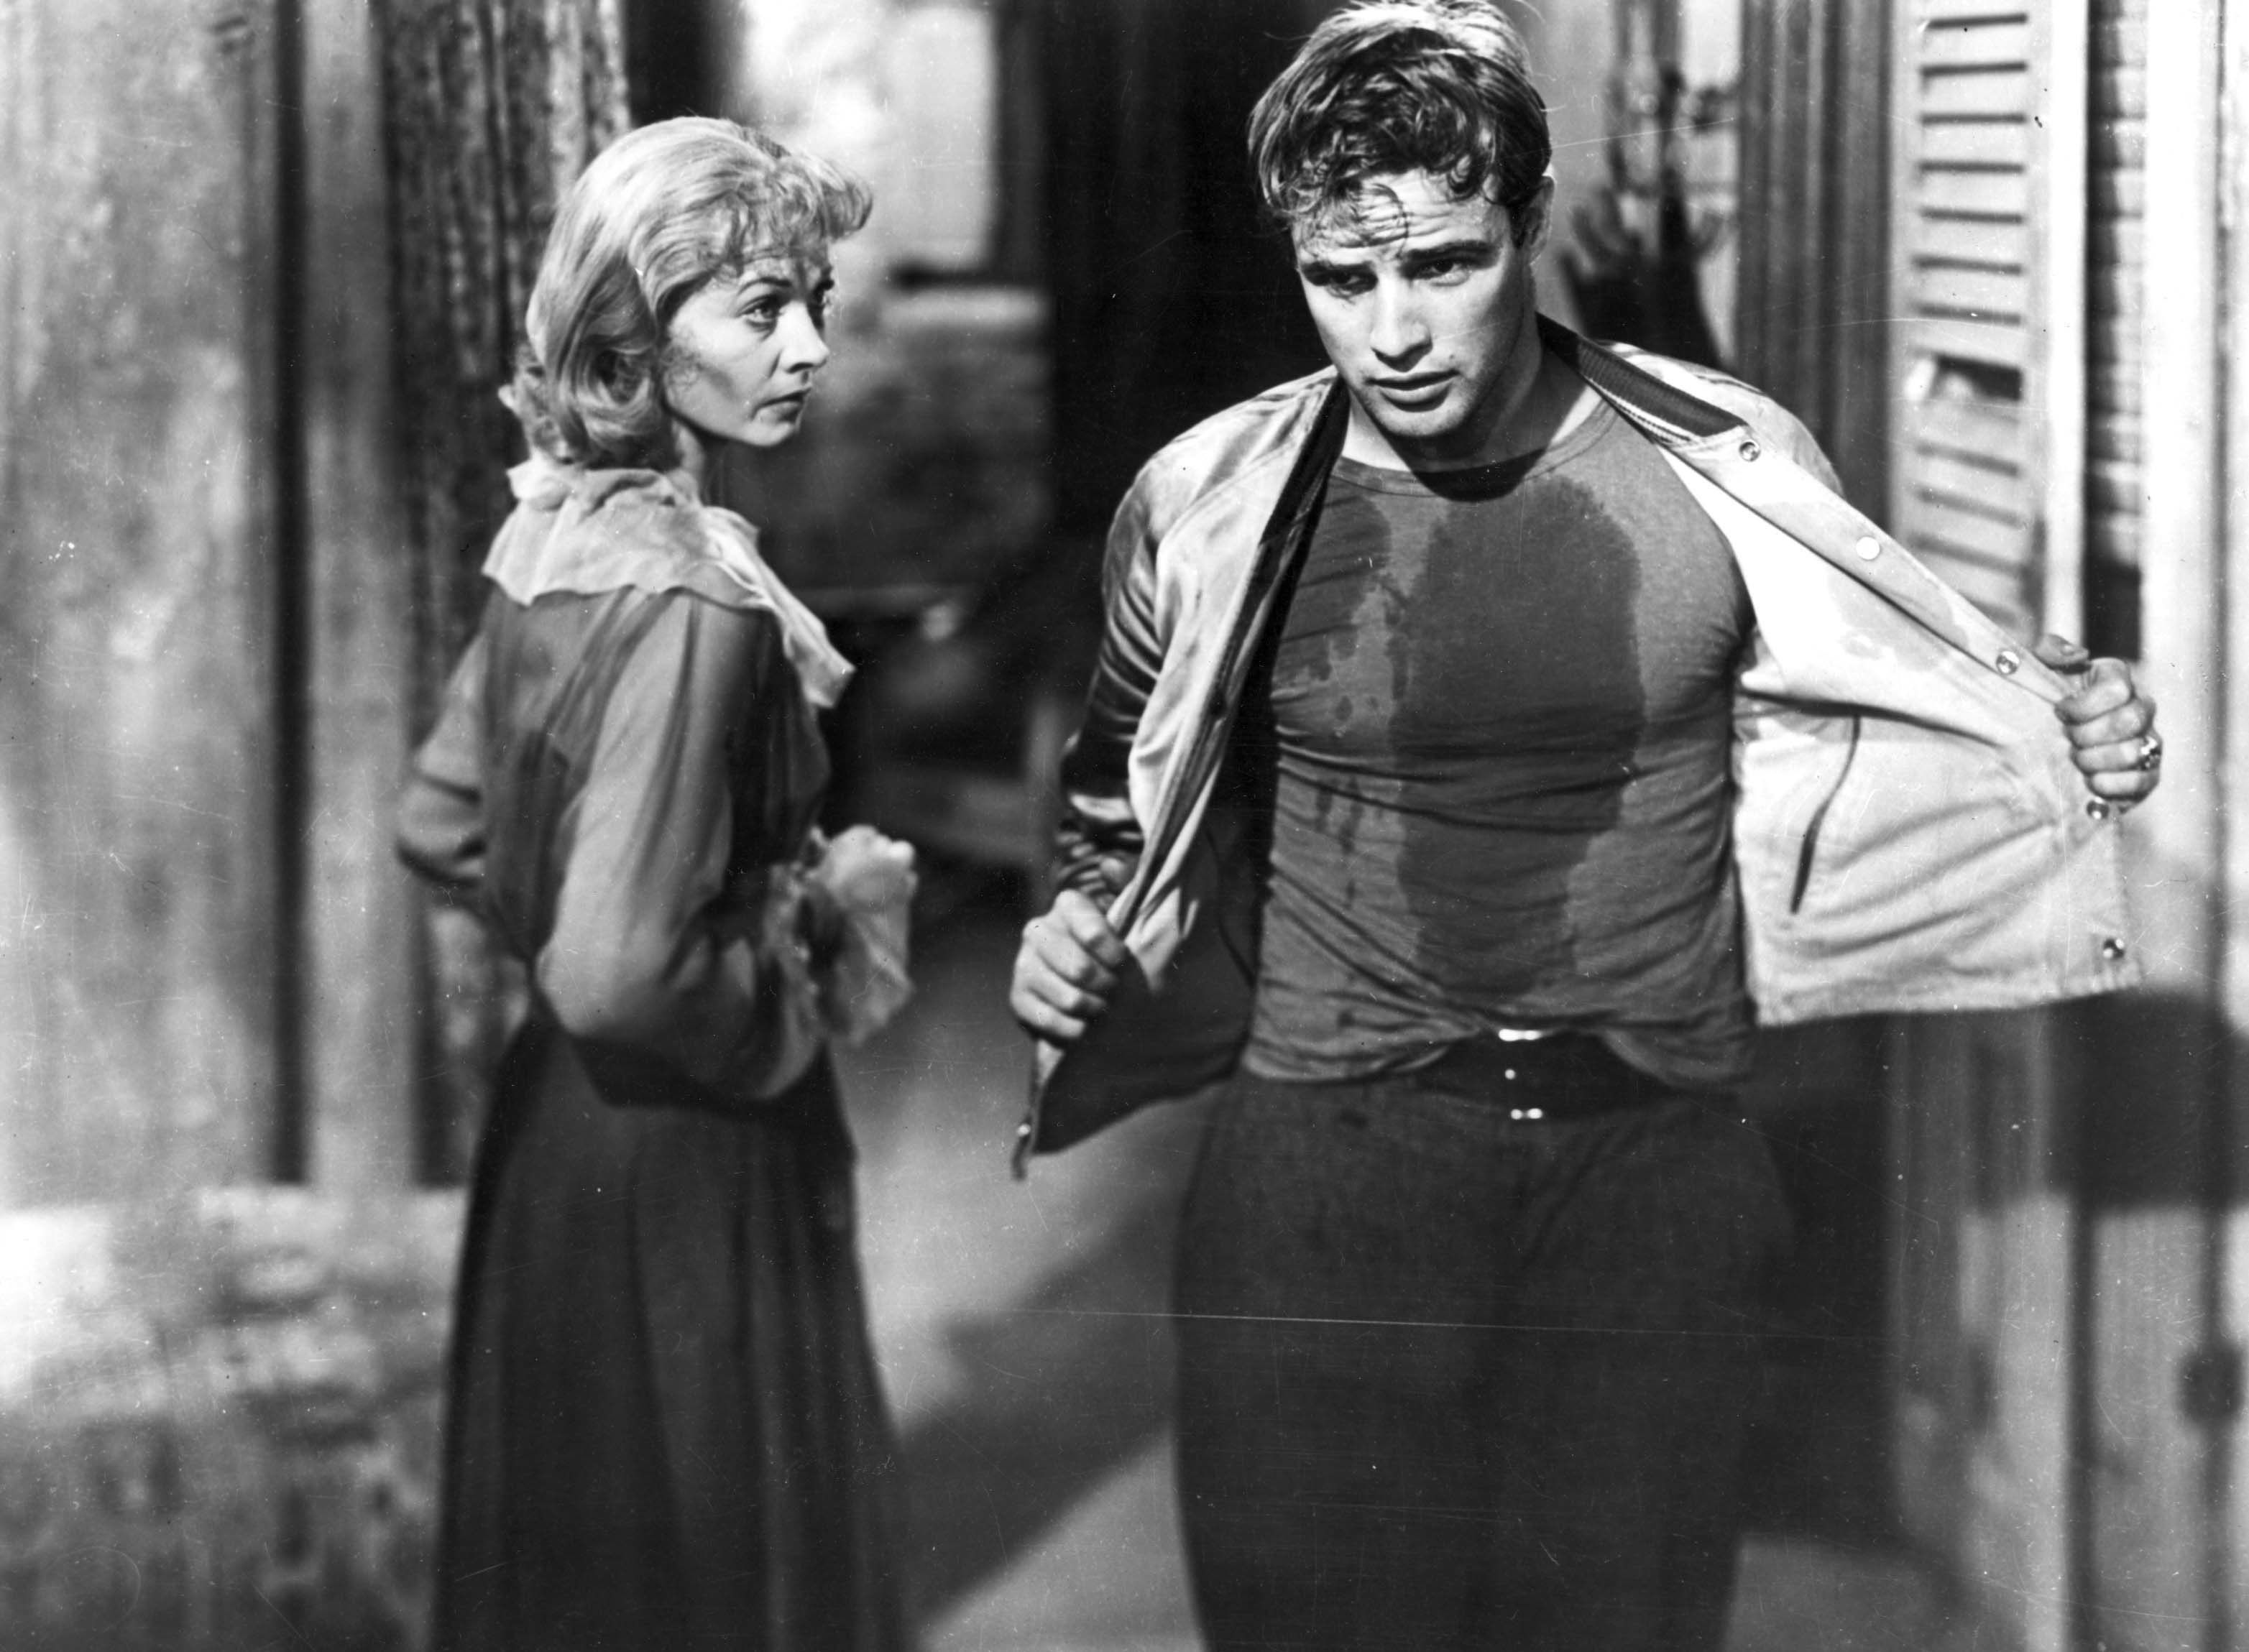 Vivien Leigh as Blanche DuBois and Marlon Brando as Stanley Kowalski taking his overshirt off and covered in grease in A Streetcar Named Desire